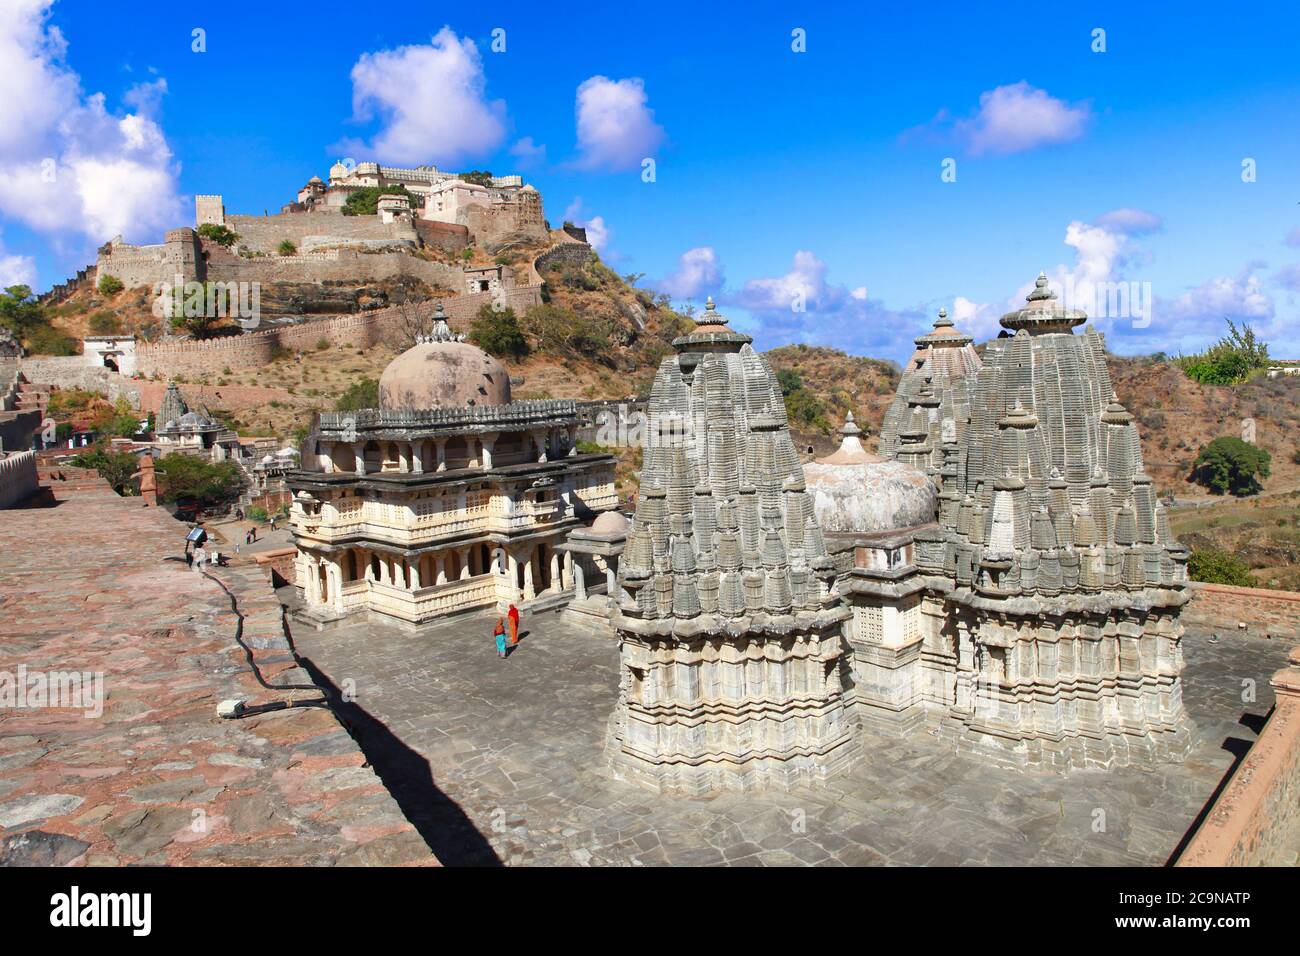 Castle and fortified walls of Kumbhalgarh Fort in Rajasthan state. India Stock Photo